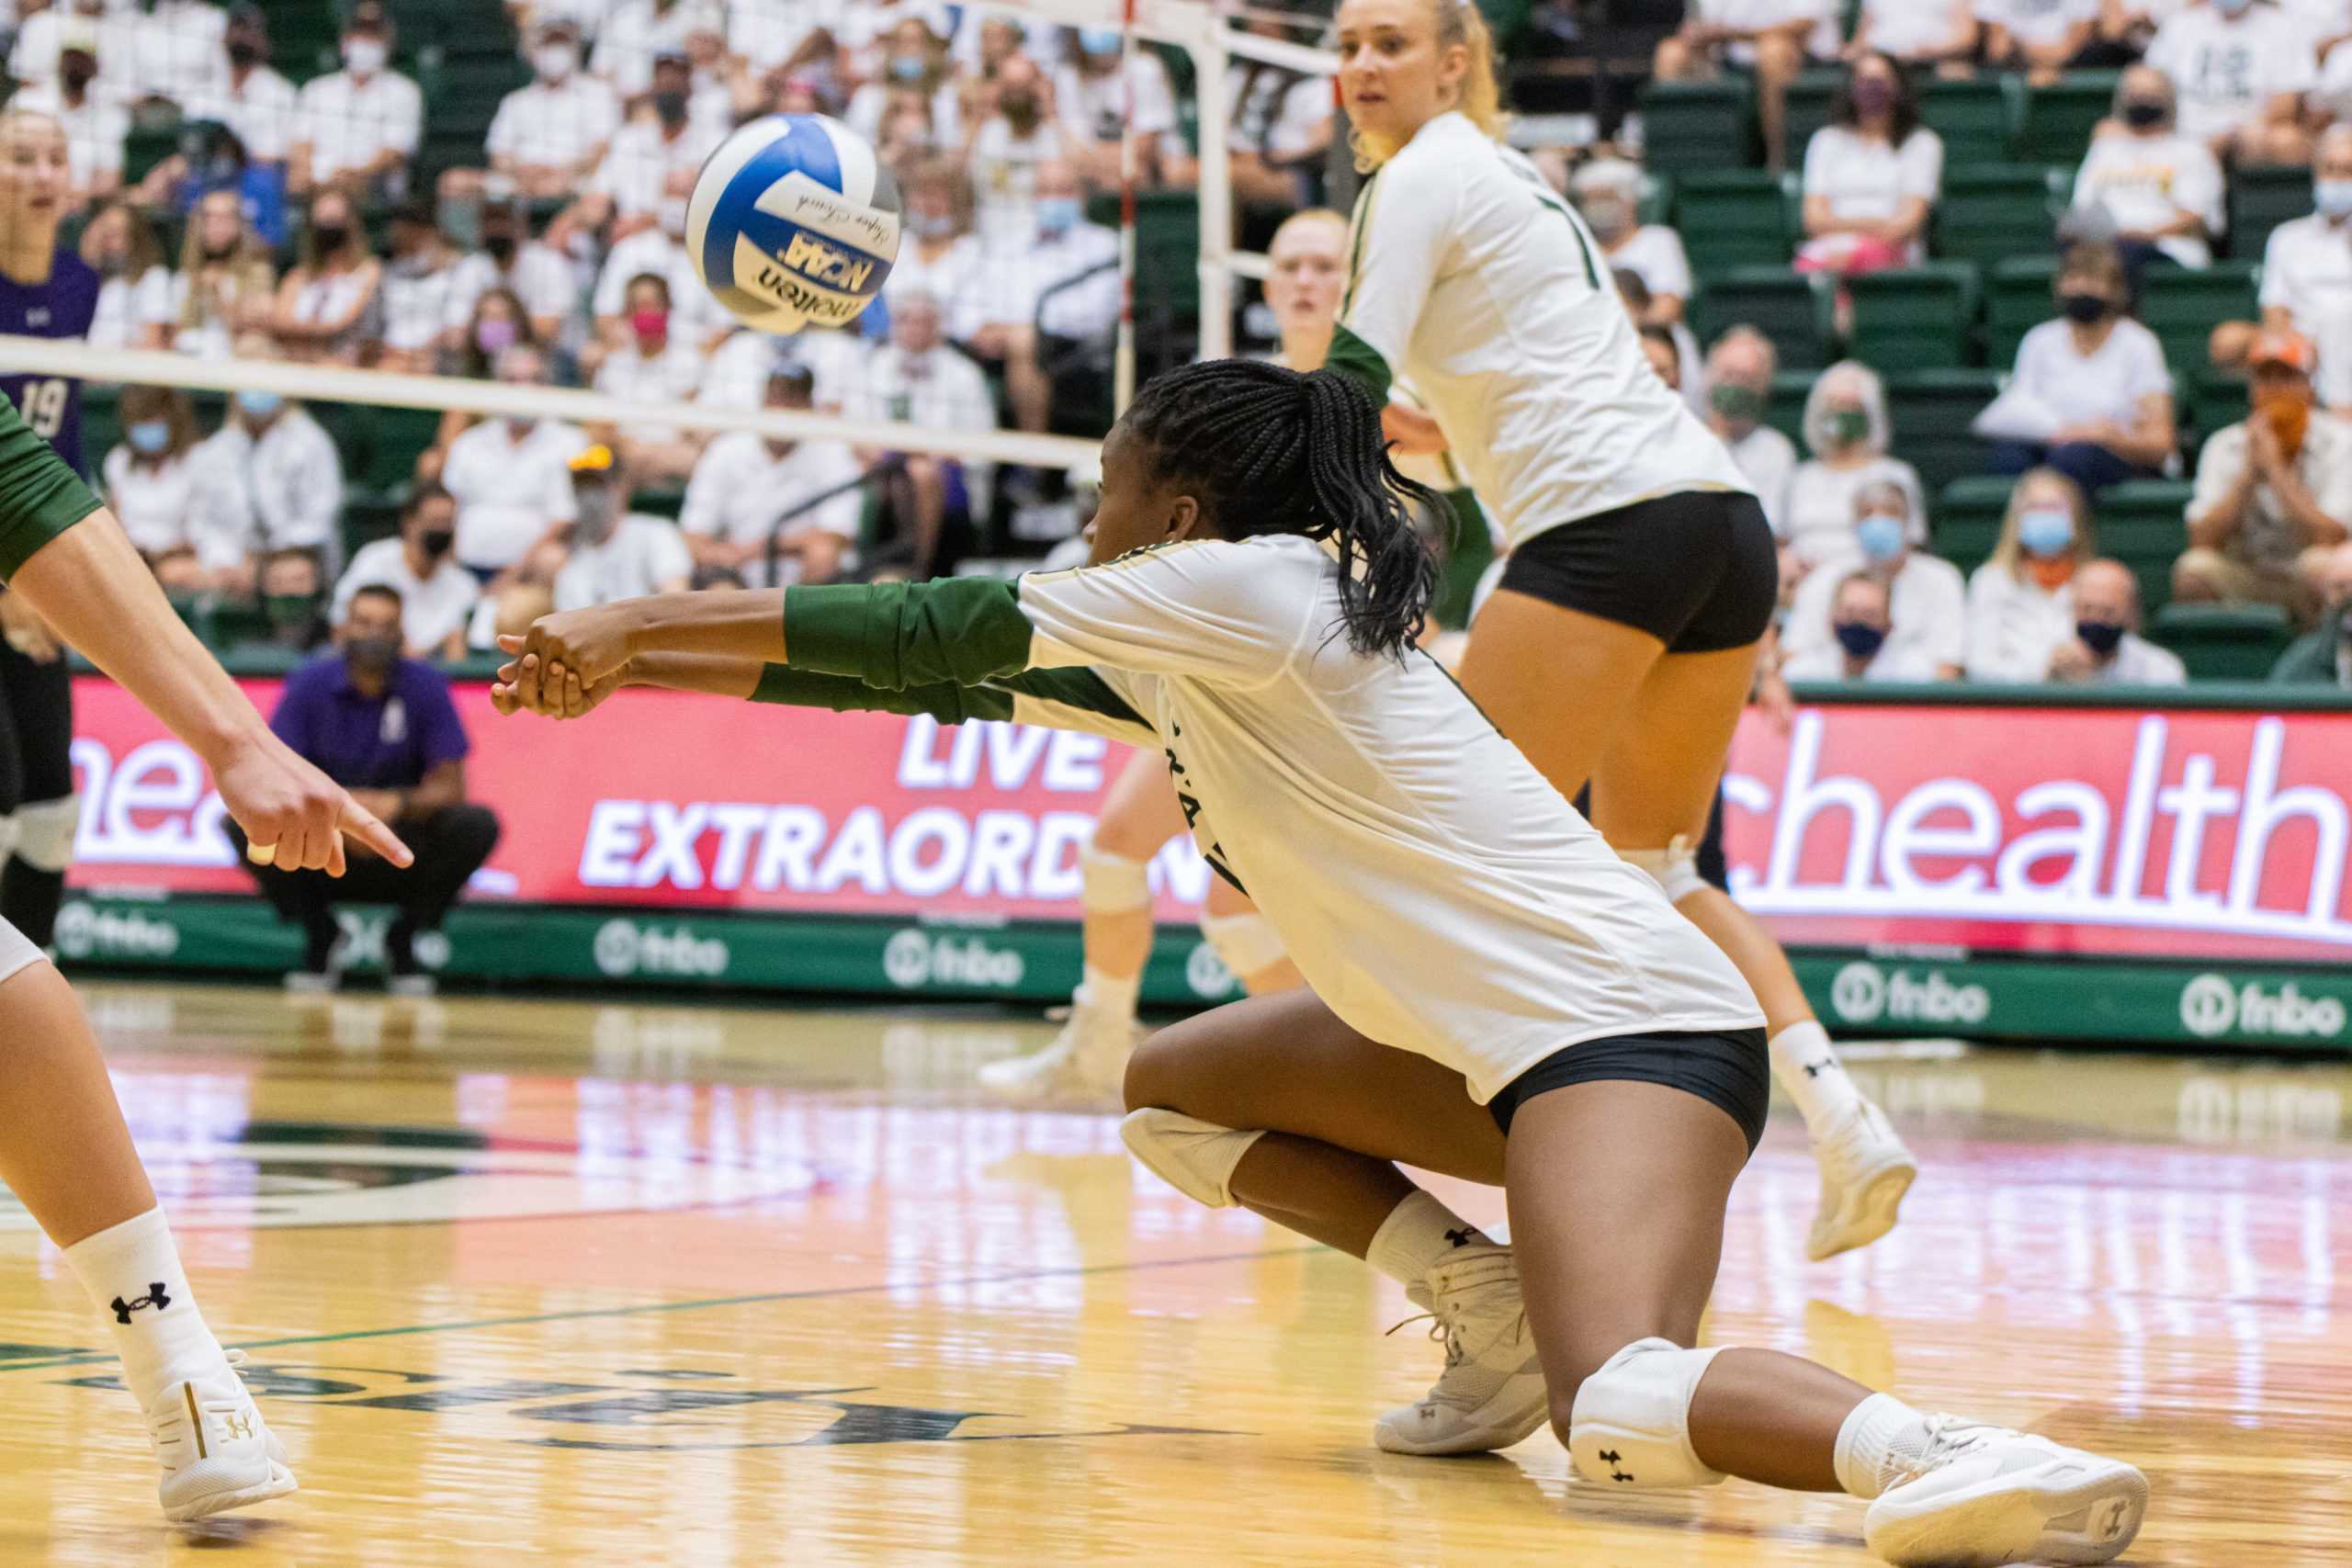 Kennedy Stanford kneels down to pass the ball towards the setter